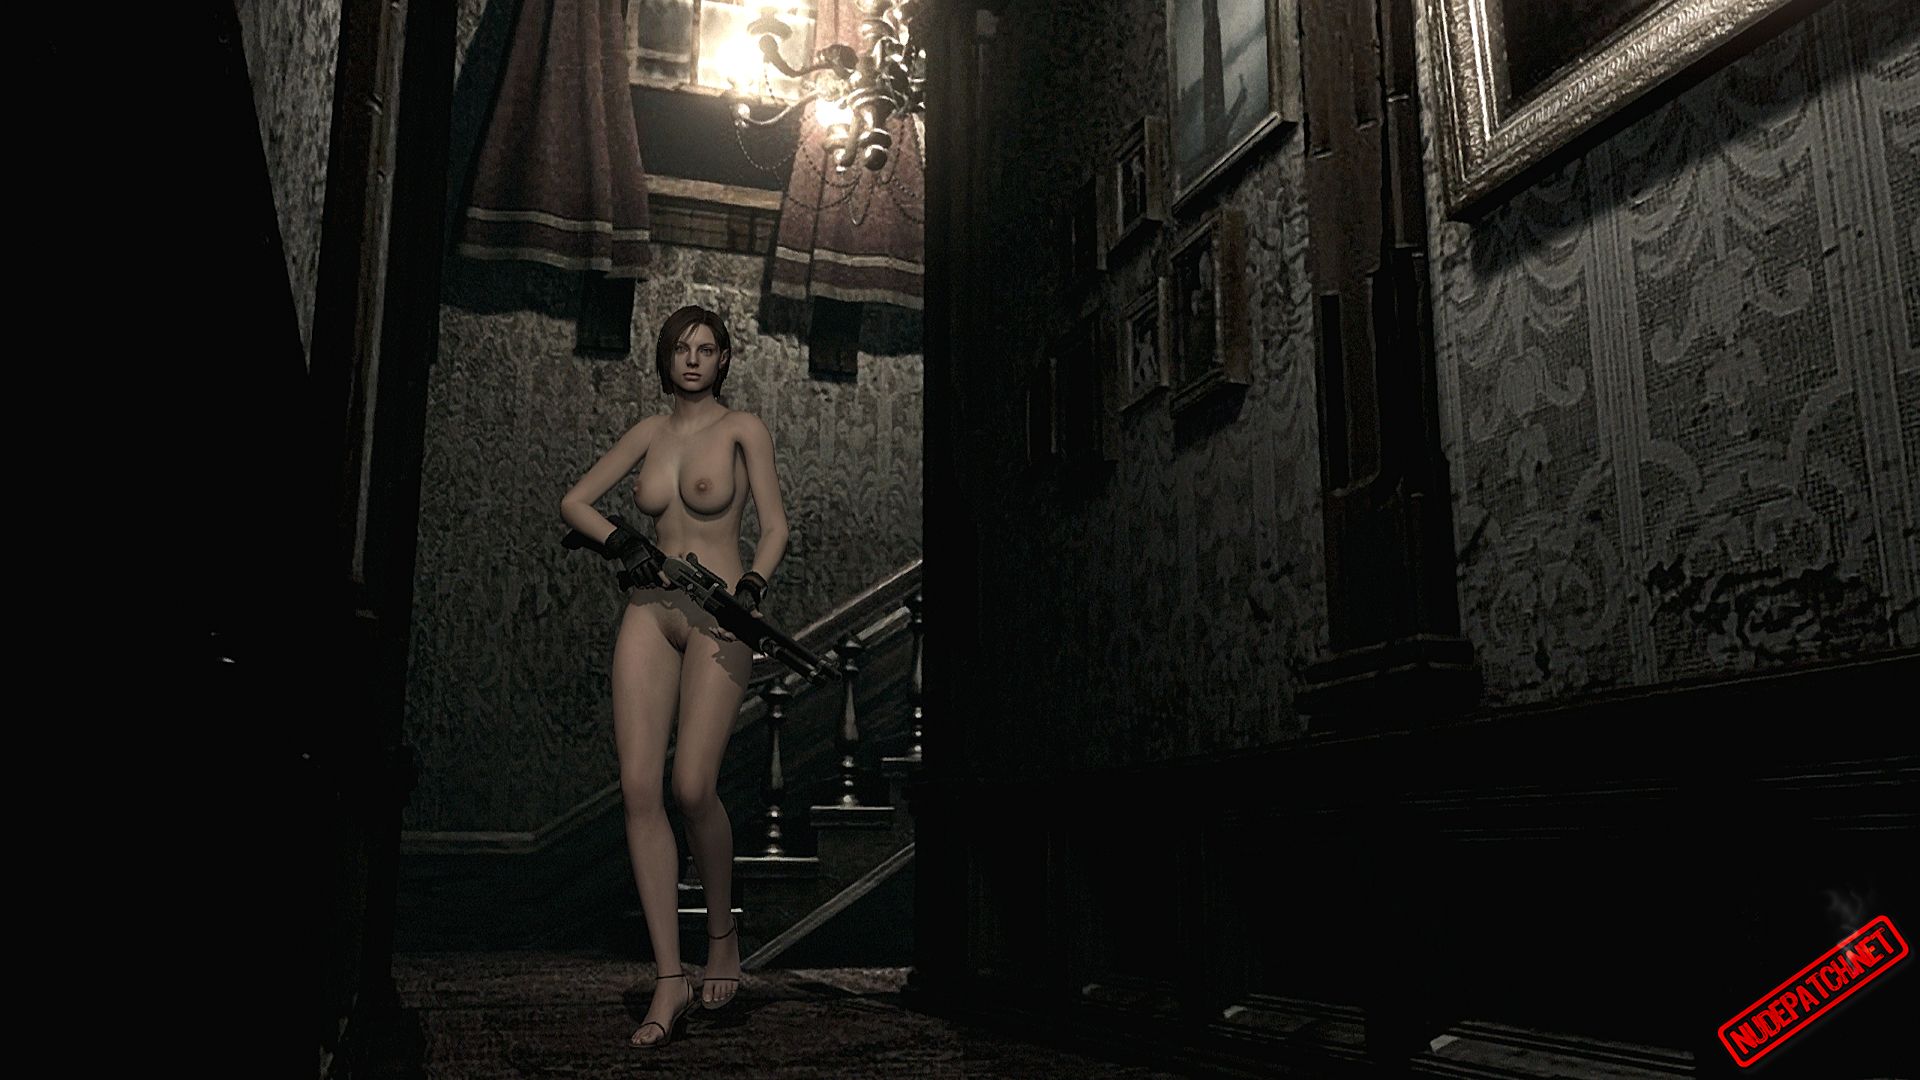 coco snow recommends resident evil hd nude mod pic